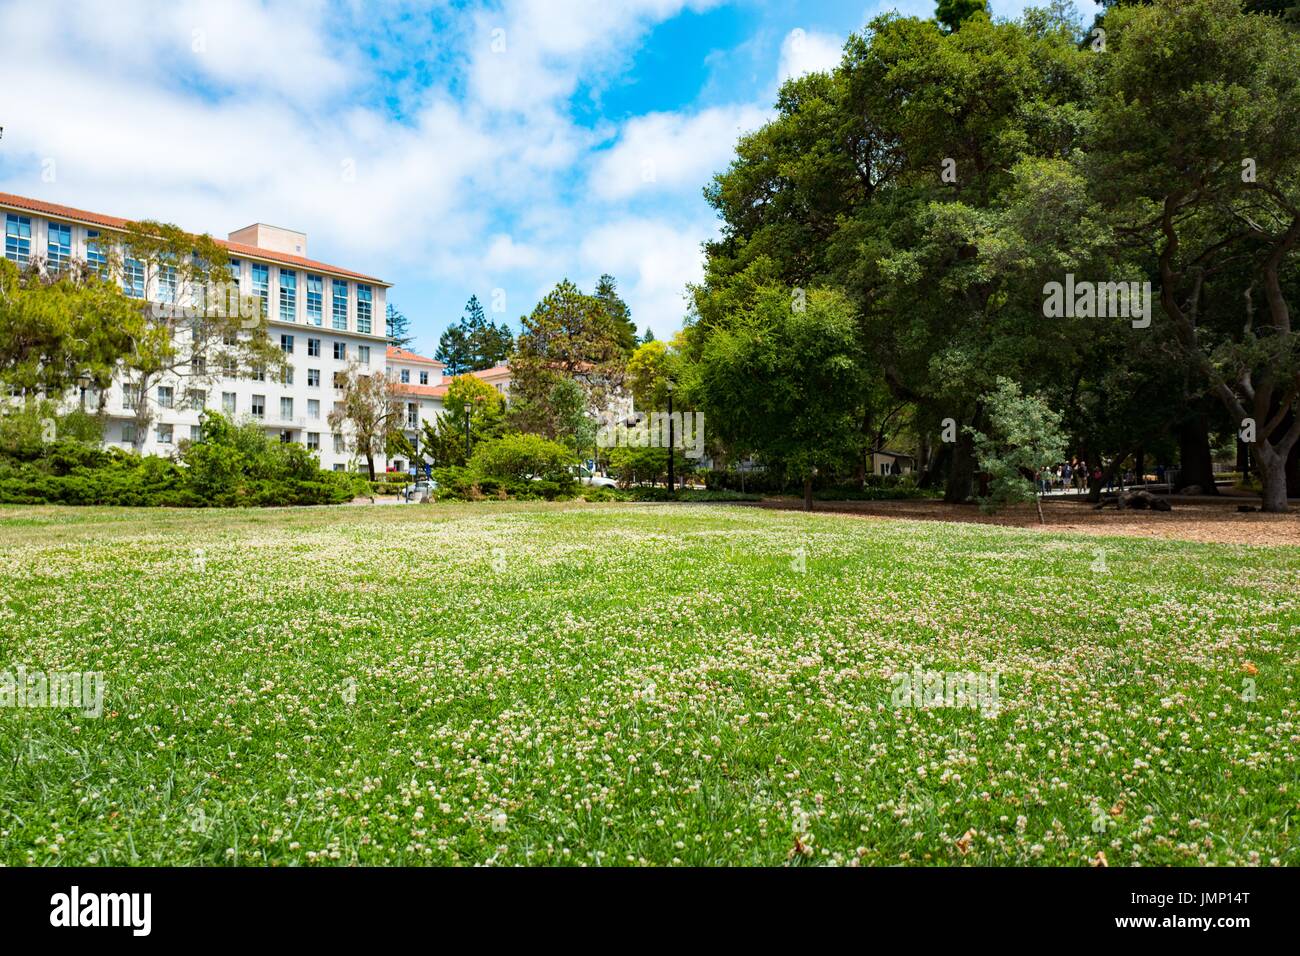 Field of flowers in front of an academic building on a sunny day, at the University of California Berkeley (UC Berkeley), a university in Berkeley, California, July 2, 2017. Stock Photo